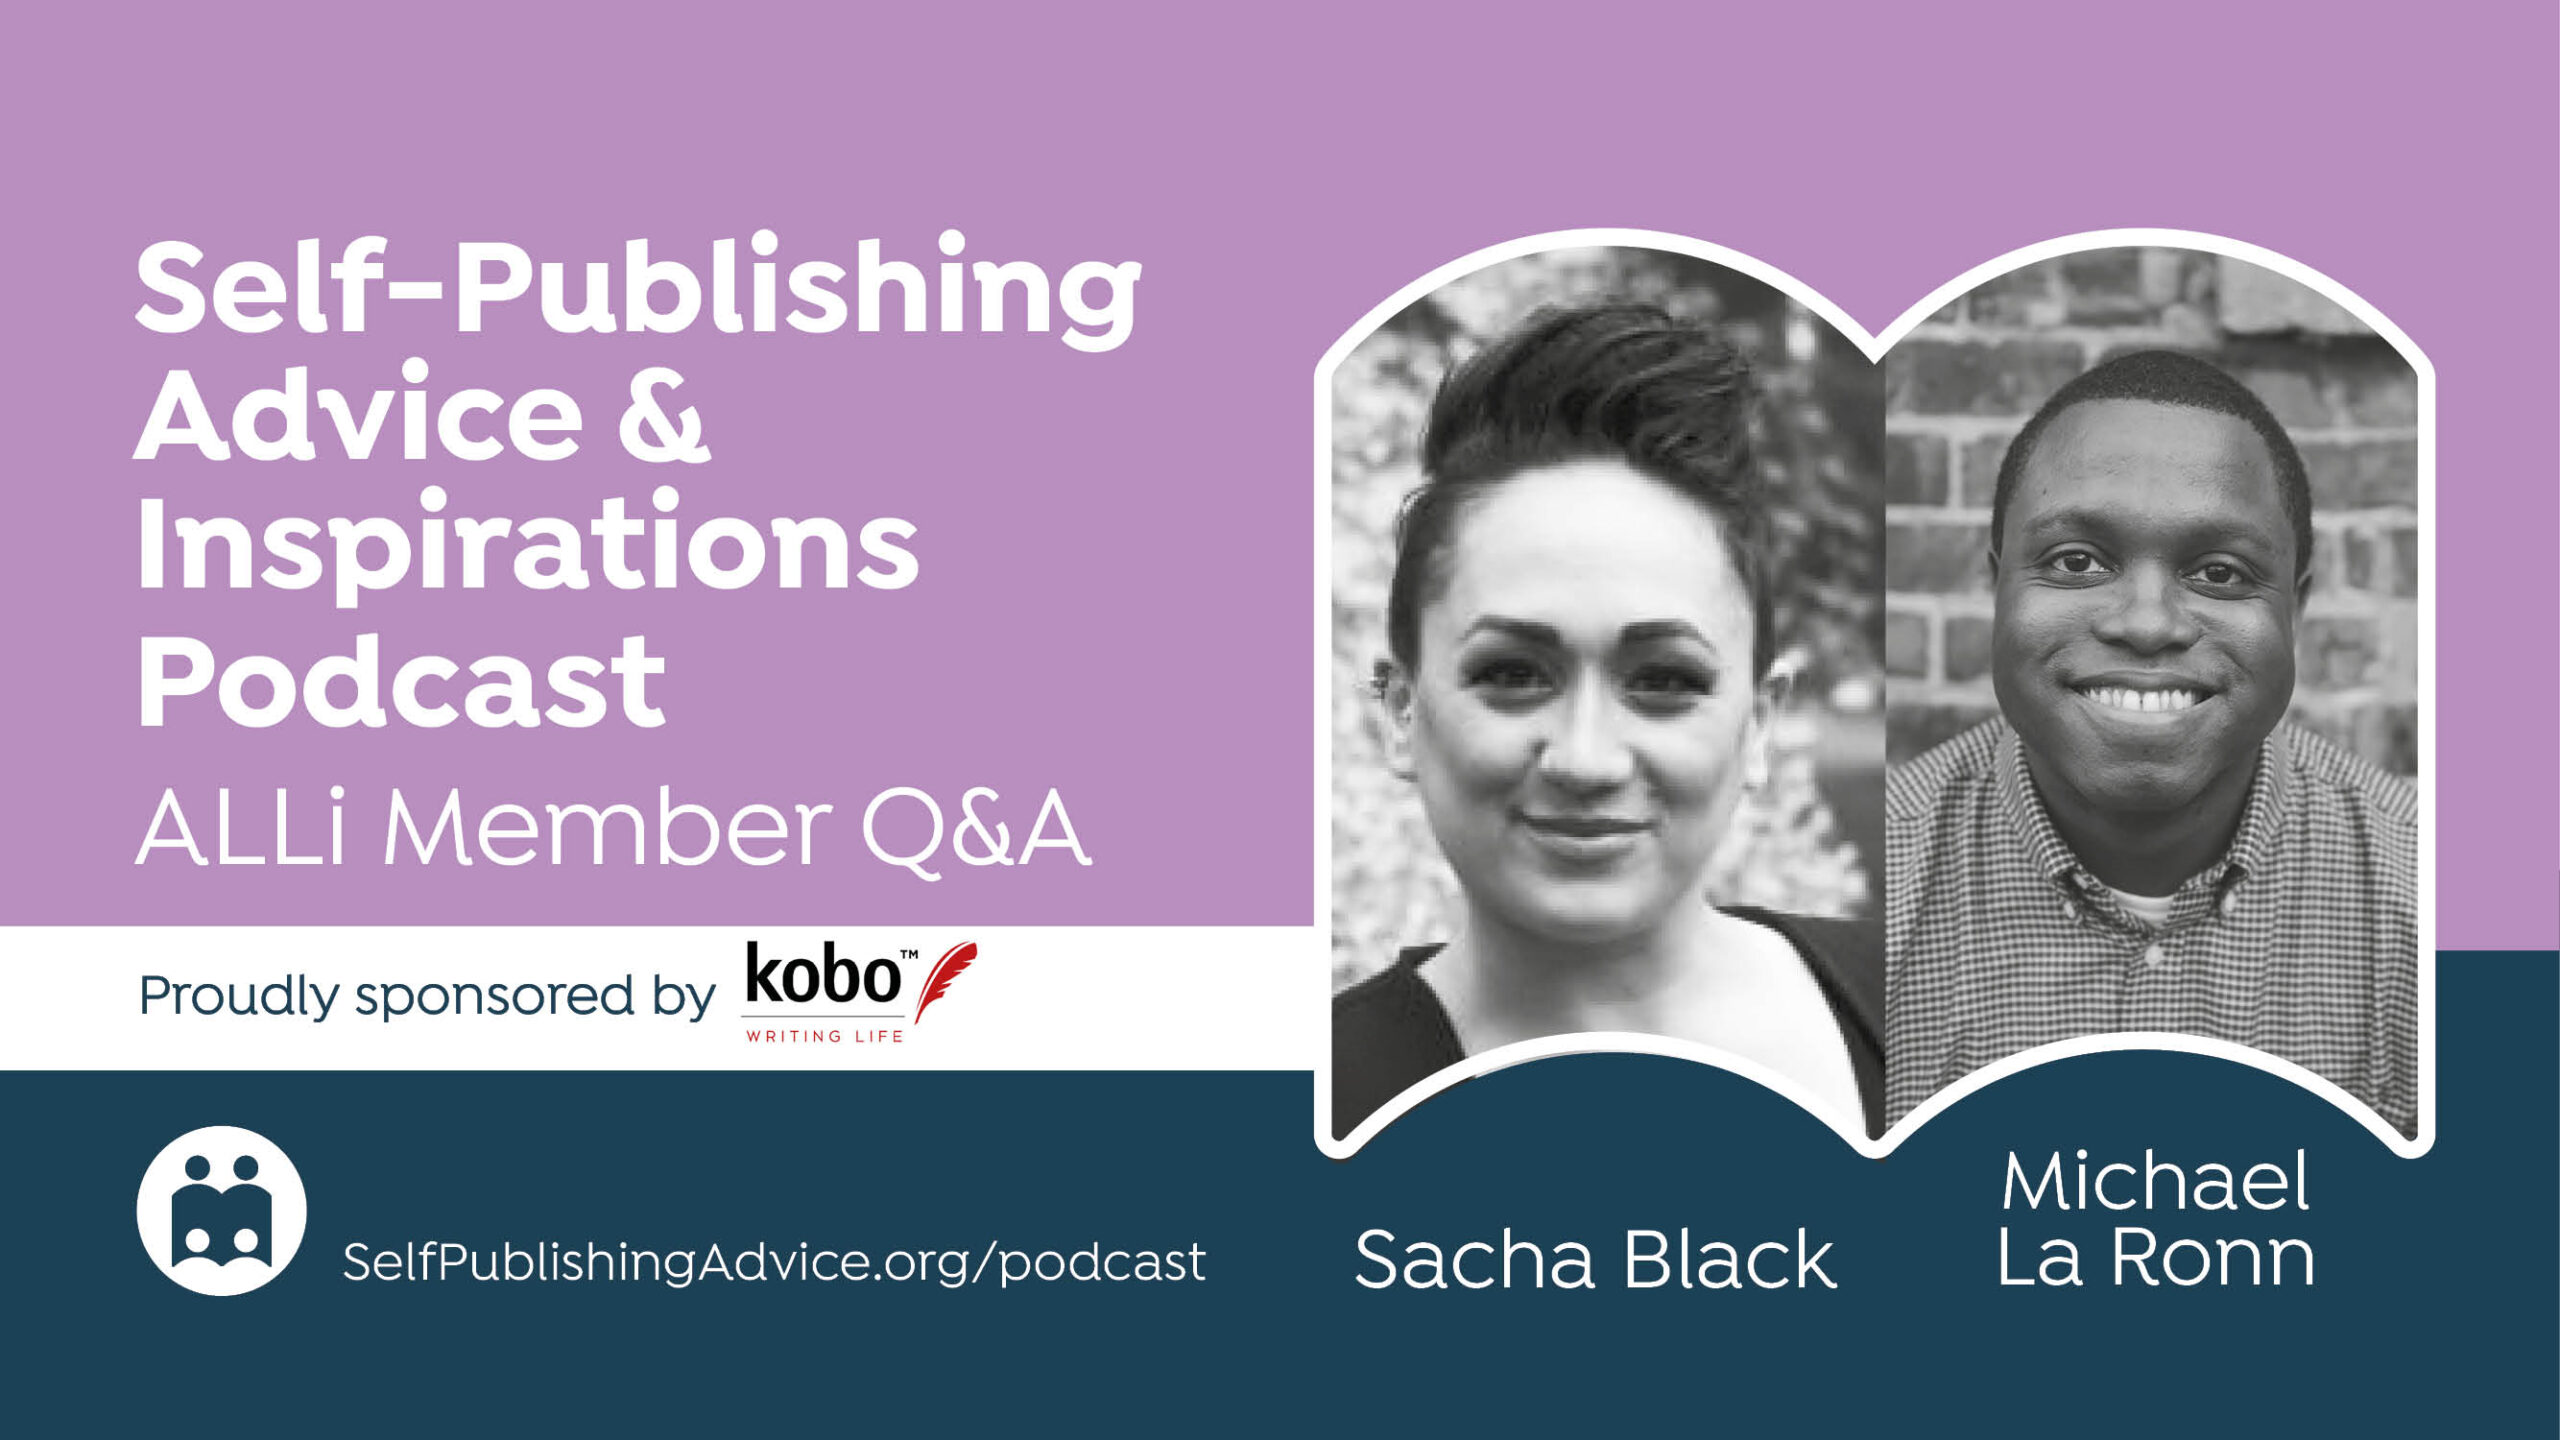 Your Most Common Self-Publishing Questions Answered By Michael La Ronn And Sacha Black In Our Member Q&A Podcast